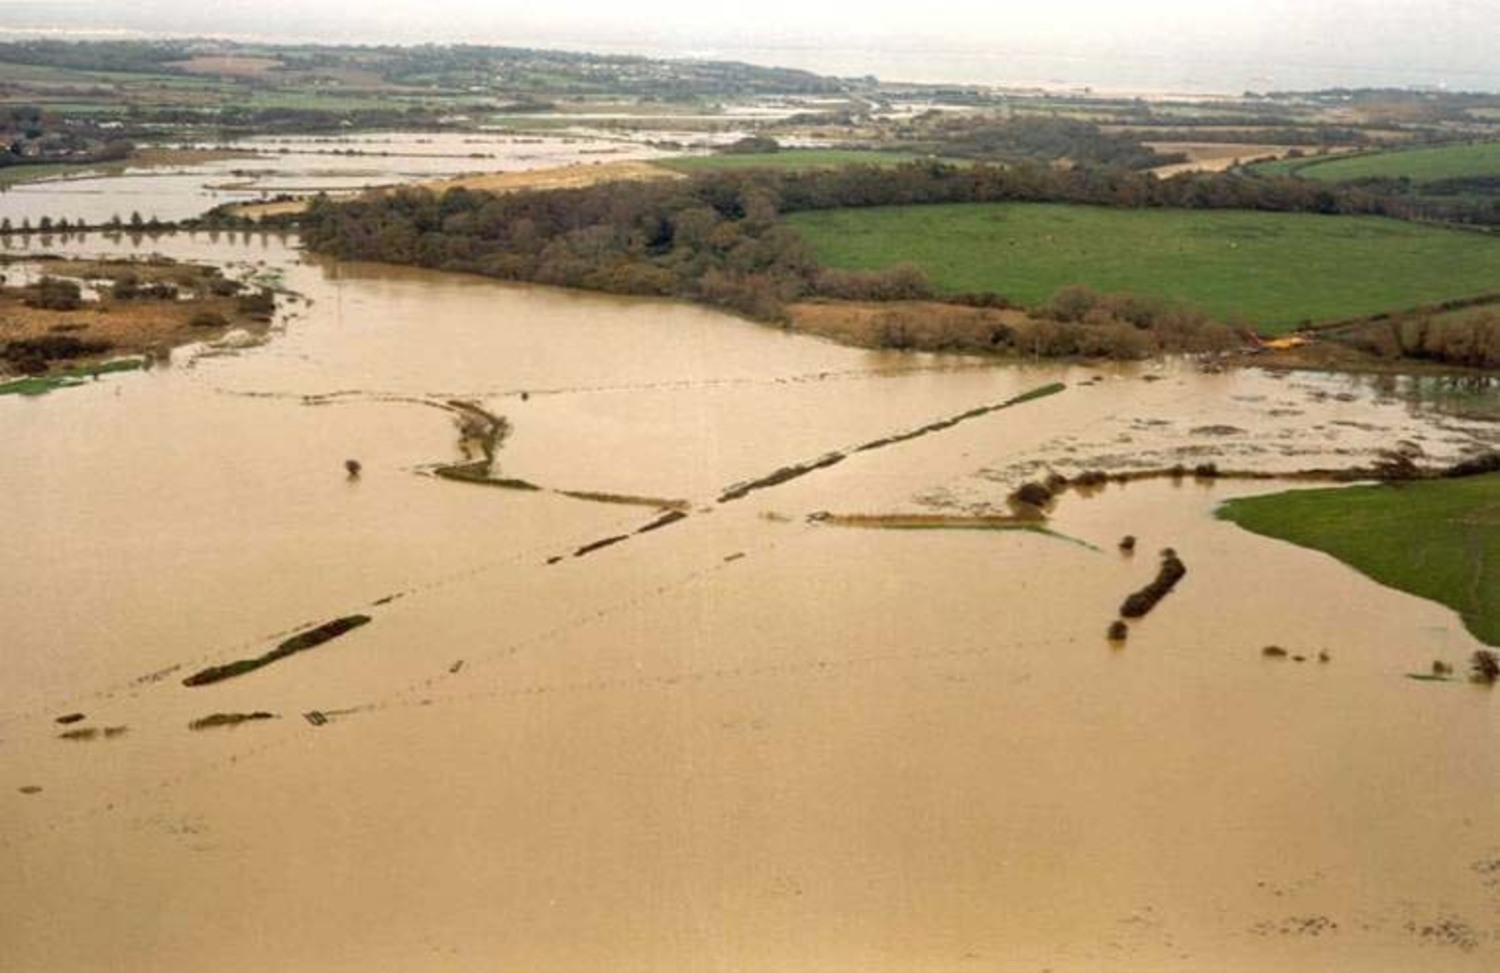 View of the flood plain following a 1 in 10 year flood on the Isle of Wight